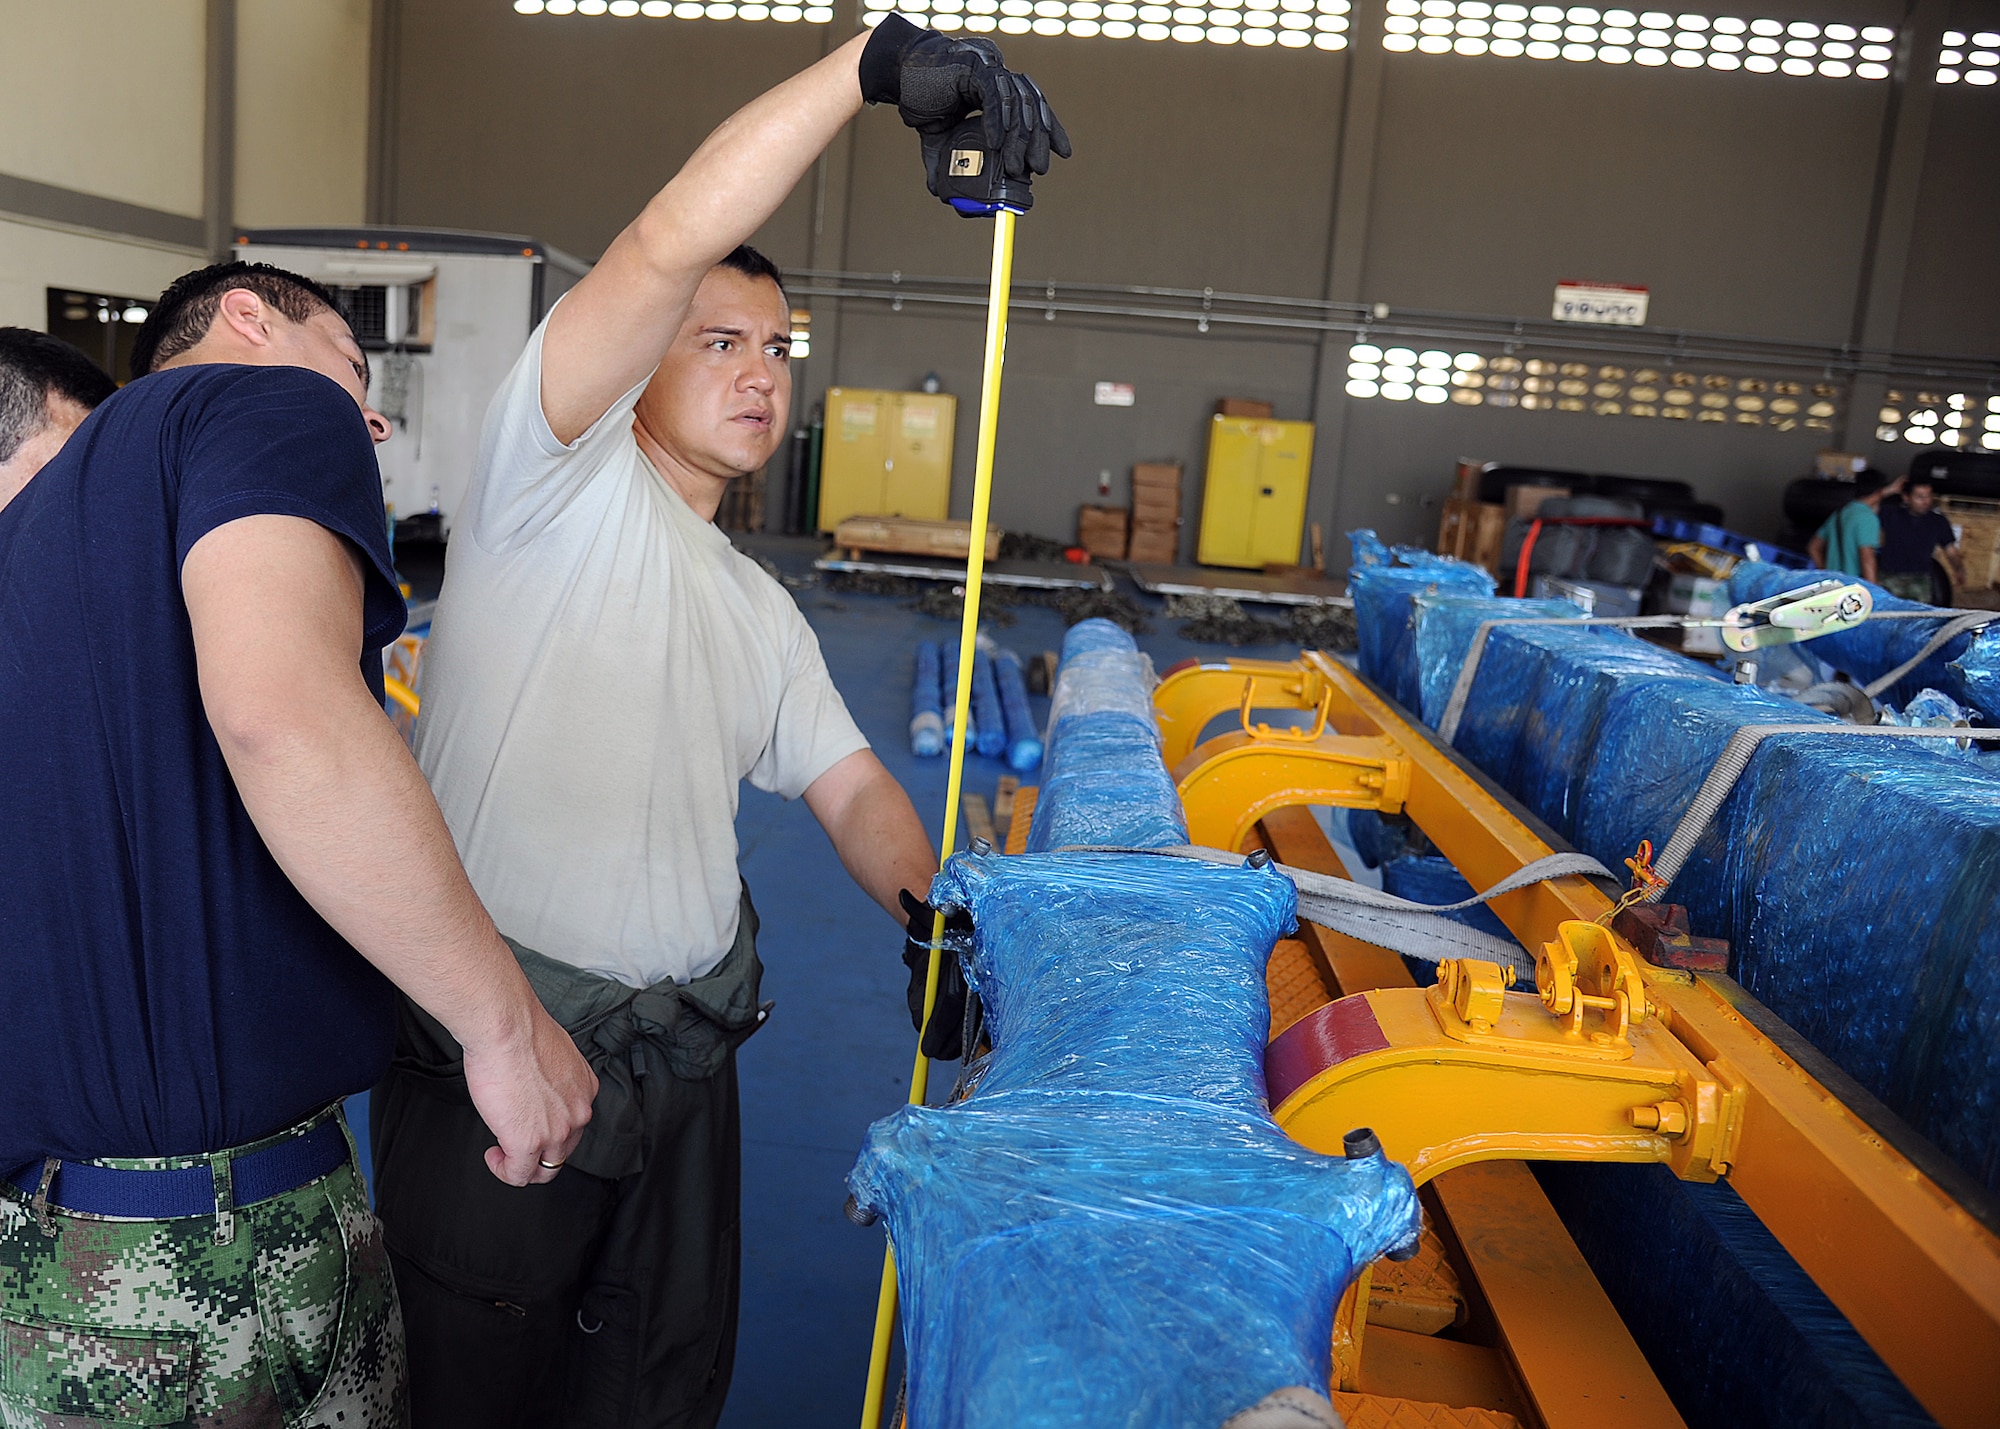 Staff Sgt. Javier Borges (right), 571st Mobility Support Advisory Squadron loadmaster air advisor, and members of the Colombian air force take measurements on a generator for loading onto aircraft during an Air Mobility Command Building Partner Capacity mission at General Alberto Pauwels Rodriguez Air Base in Barranquilla, Colombia, June 27.  (U.S. Air Force photo by Tech. Sgt. Lesley Waters)